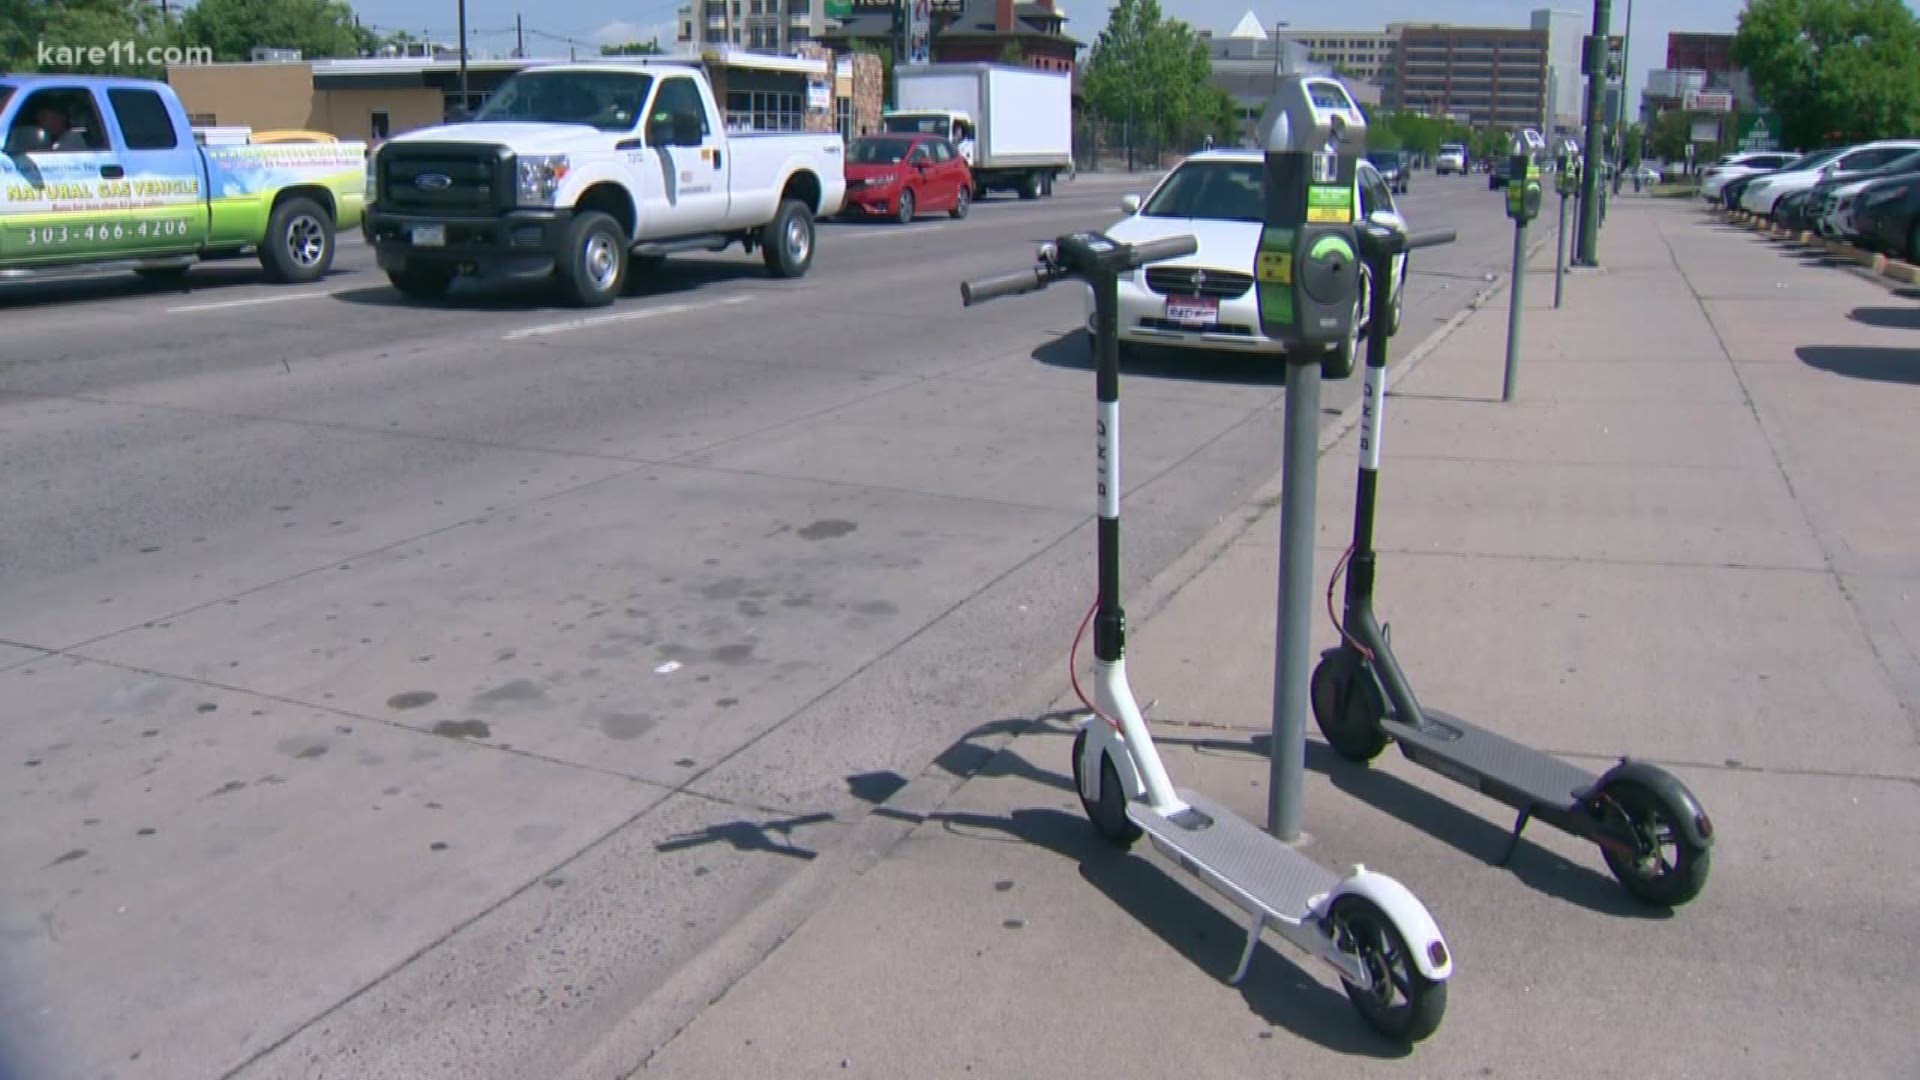 They're similar to Nice Ride's bike sharing program but instead of bright, green bikes, these are black, electric scooters. They also don't have a docking station -- which has caused complaints in other cities. https://kare11.tv/2L6nsrM